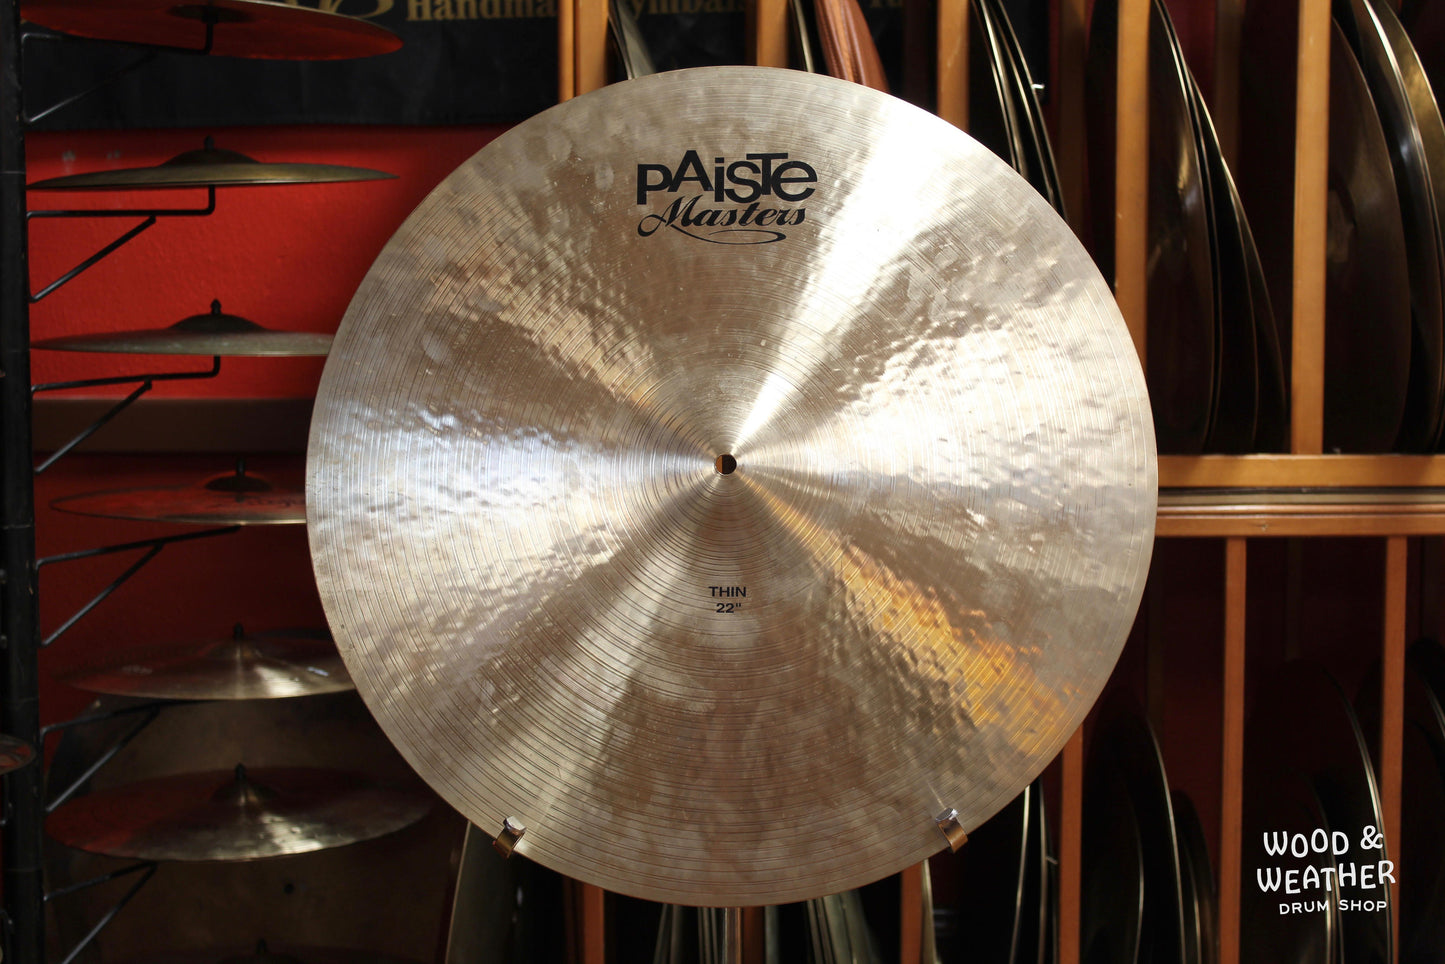 Used Paiste Masters Series 22" Thin Ride Cymbal 2124g